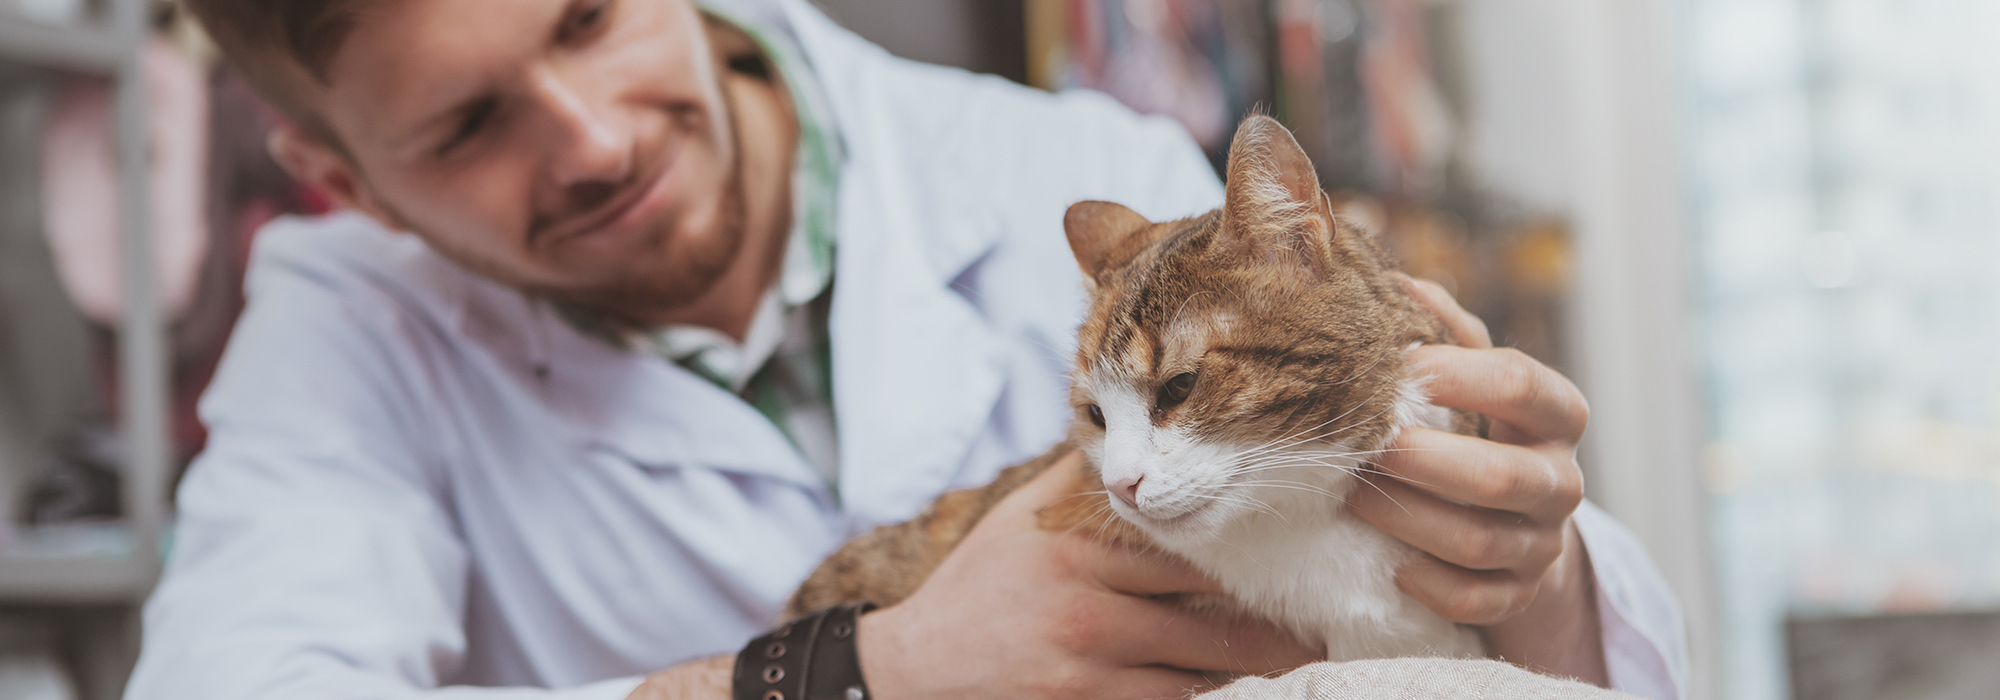 Veterinary Surgeon and a Cat